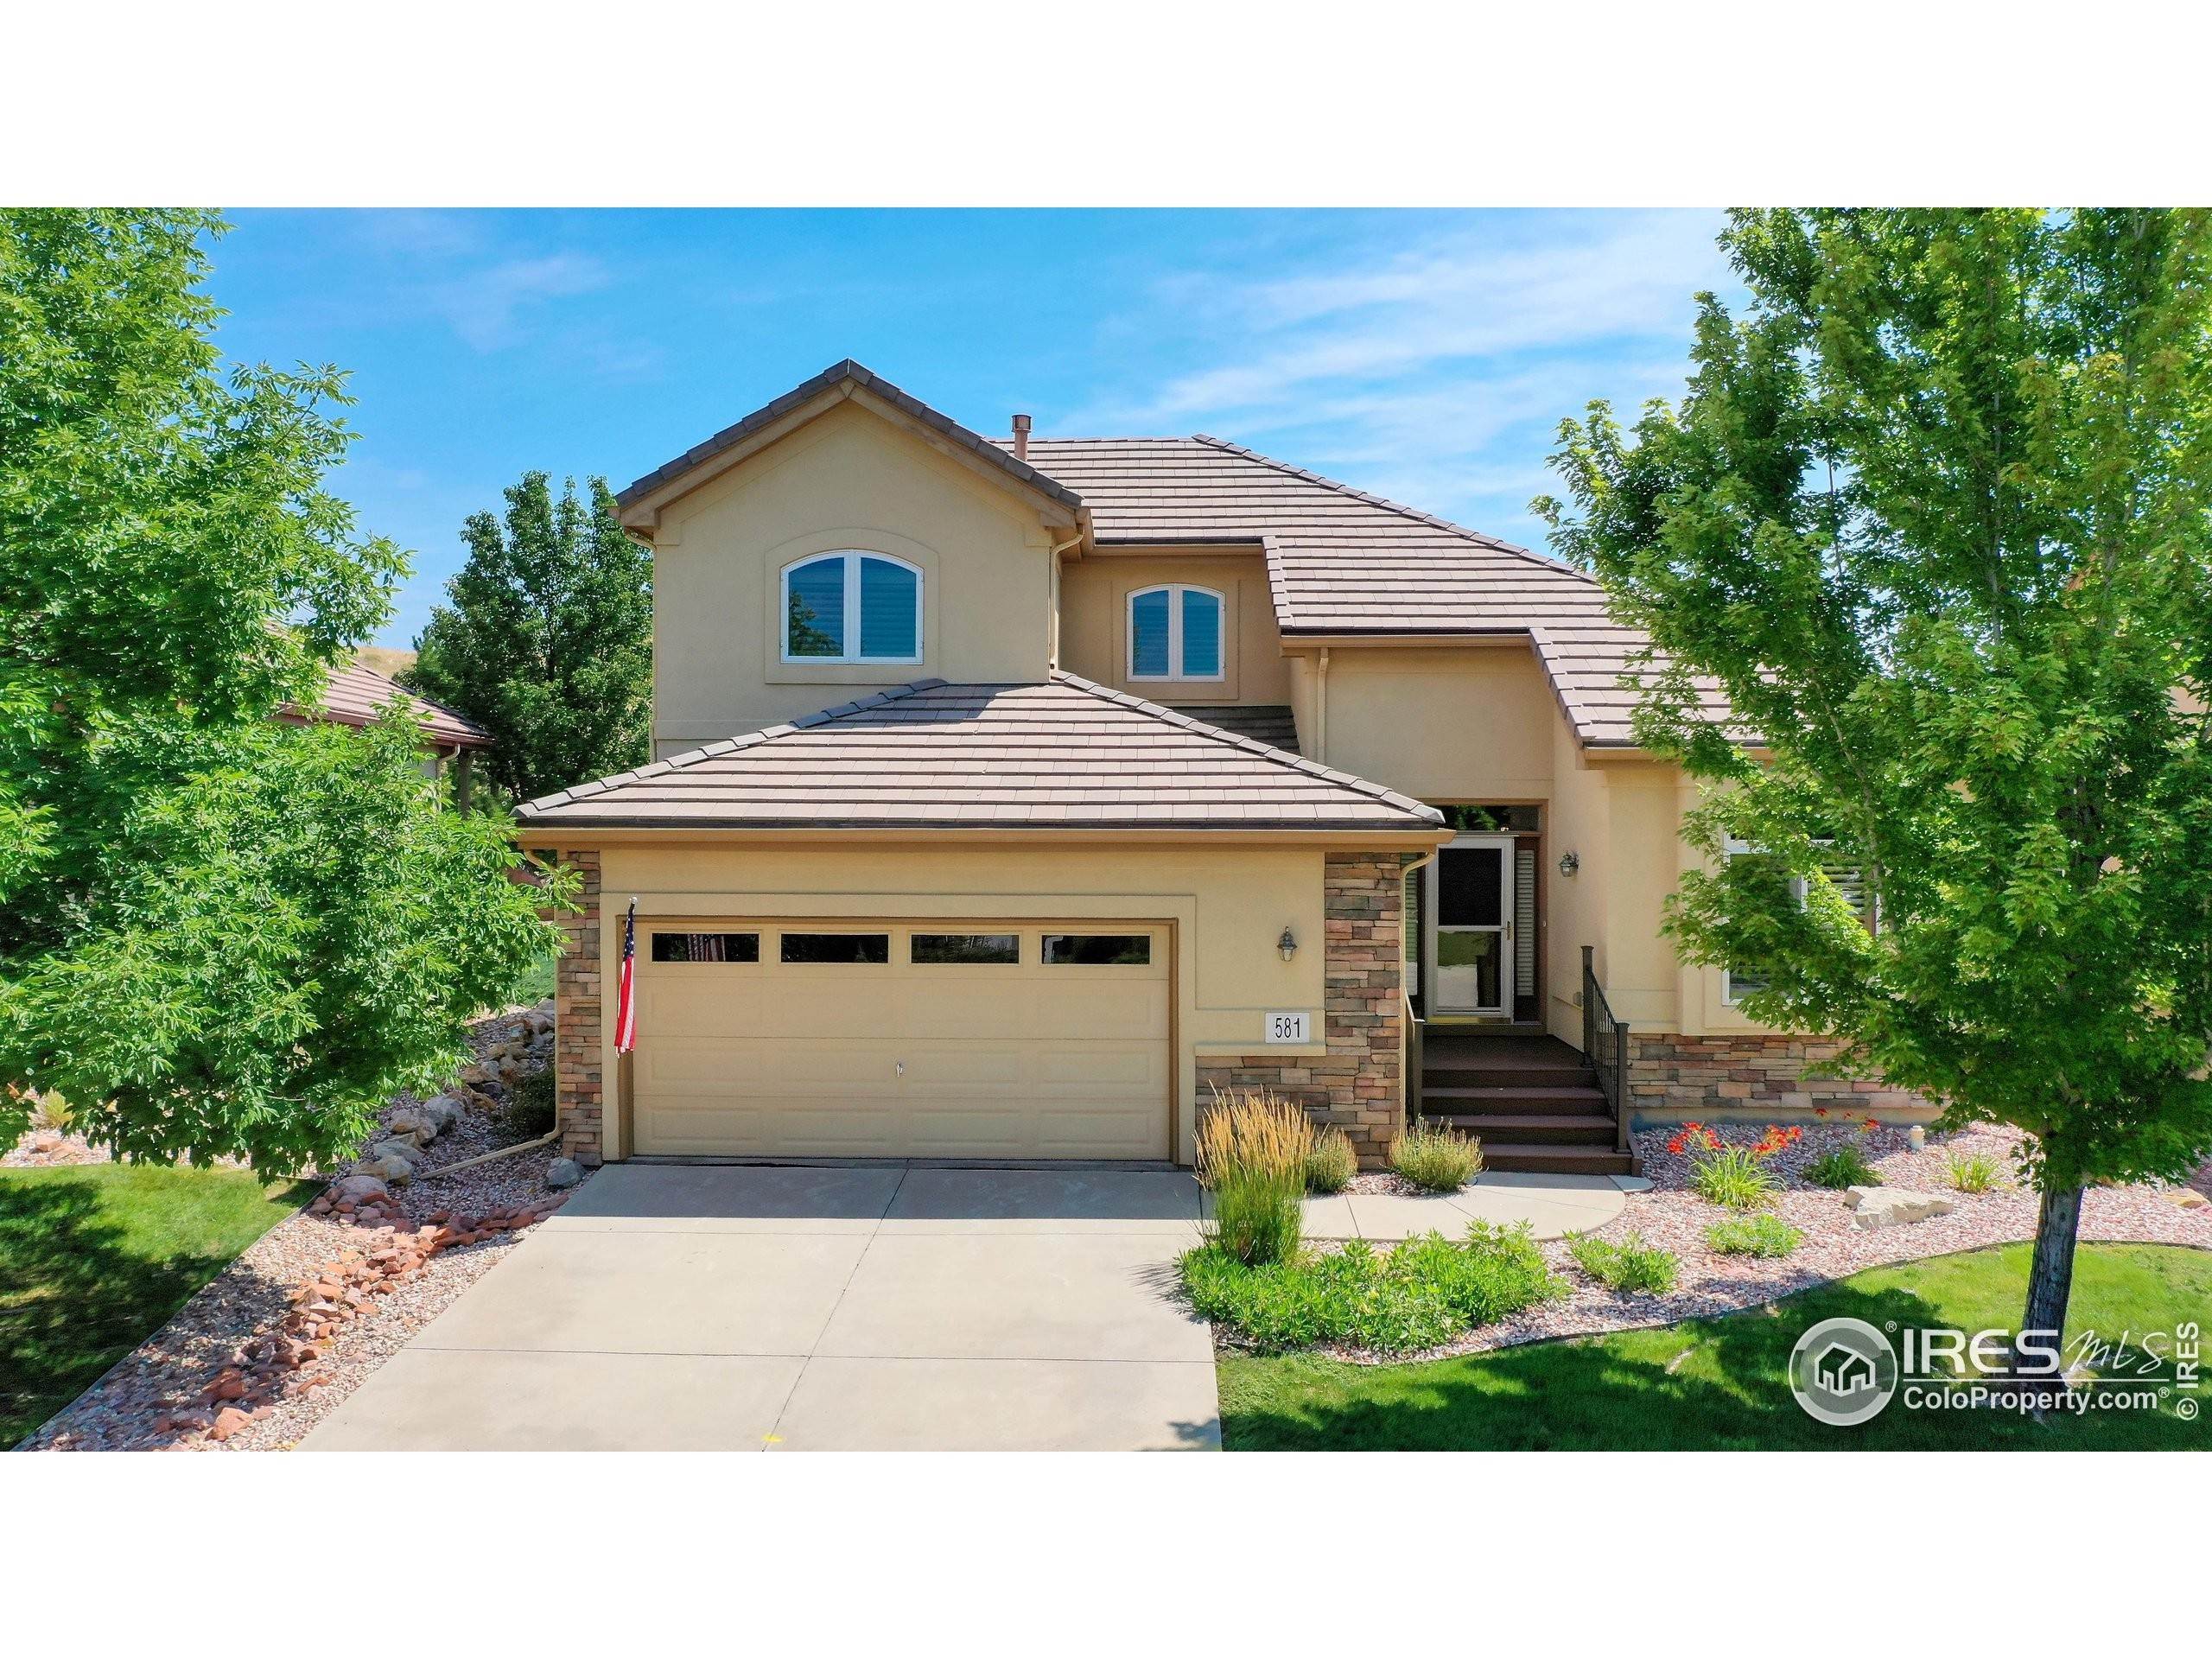 Single Family Homes for Active at 581 Mariana Pointe Drive Loveland, Colorado 80537 United States